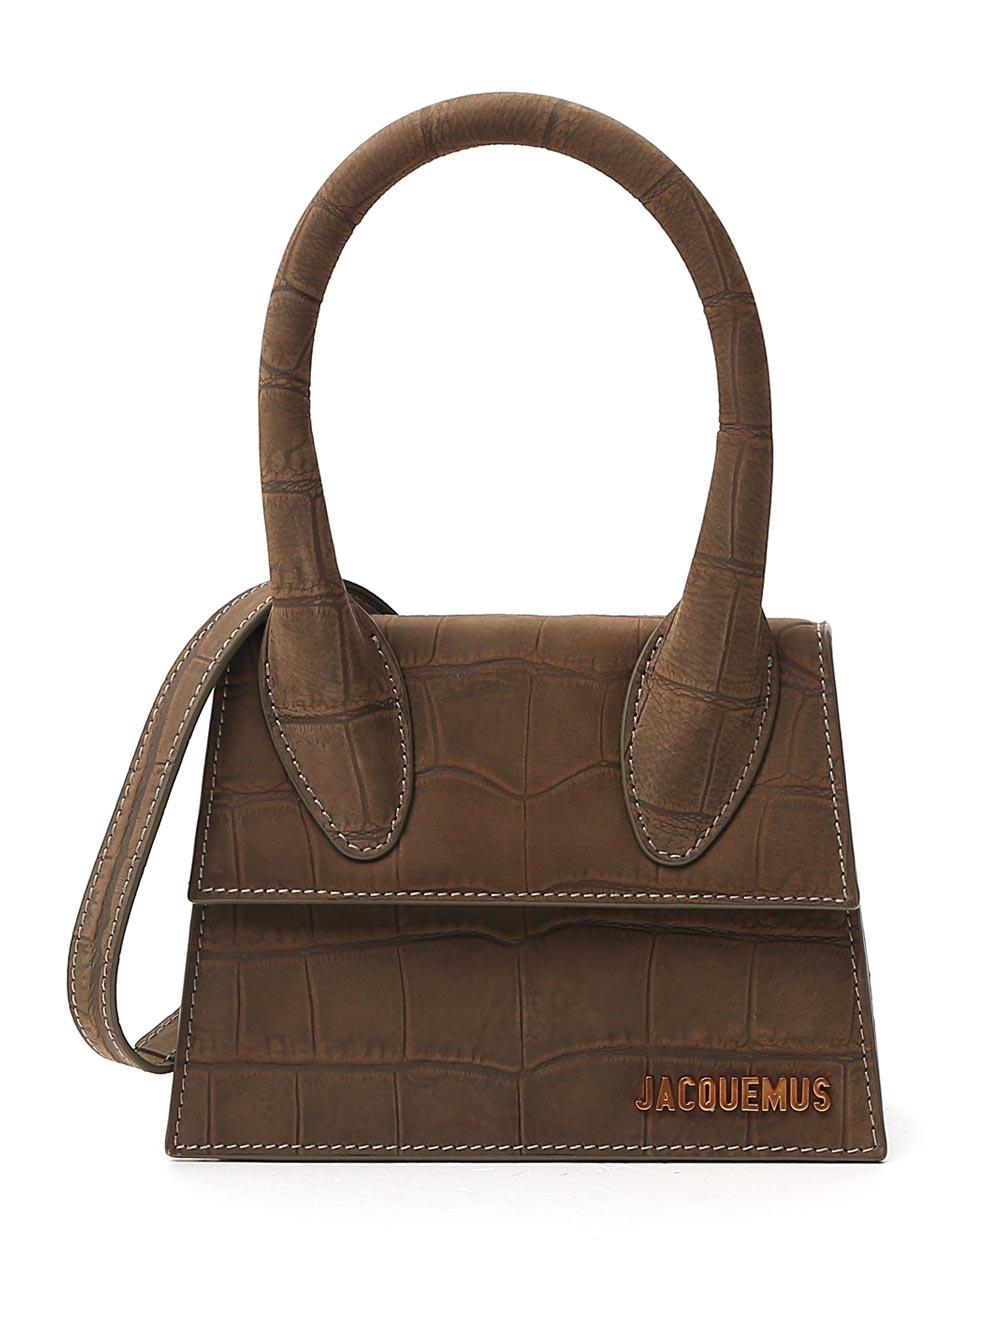 Jacquemus Leather Le Chiquito Moyen Crossbody Bag in Green - Lyst